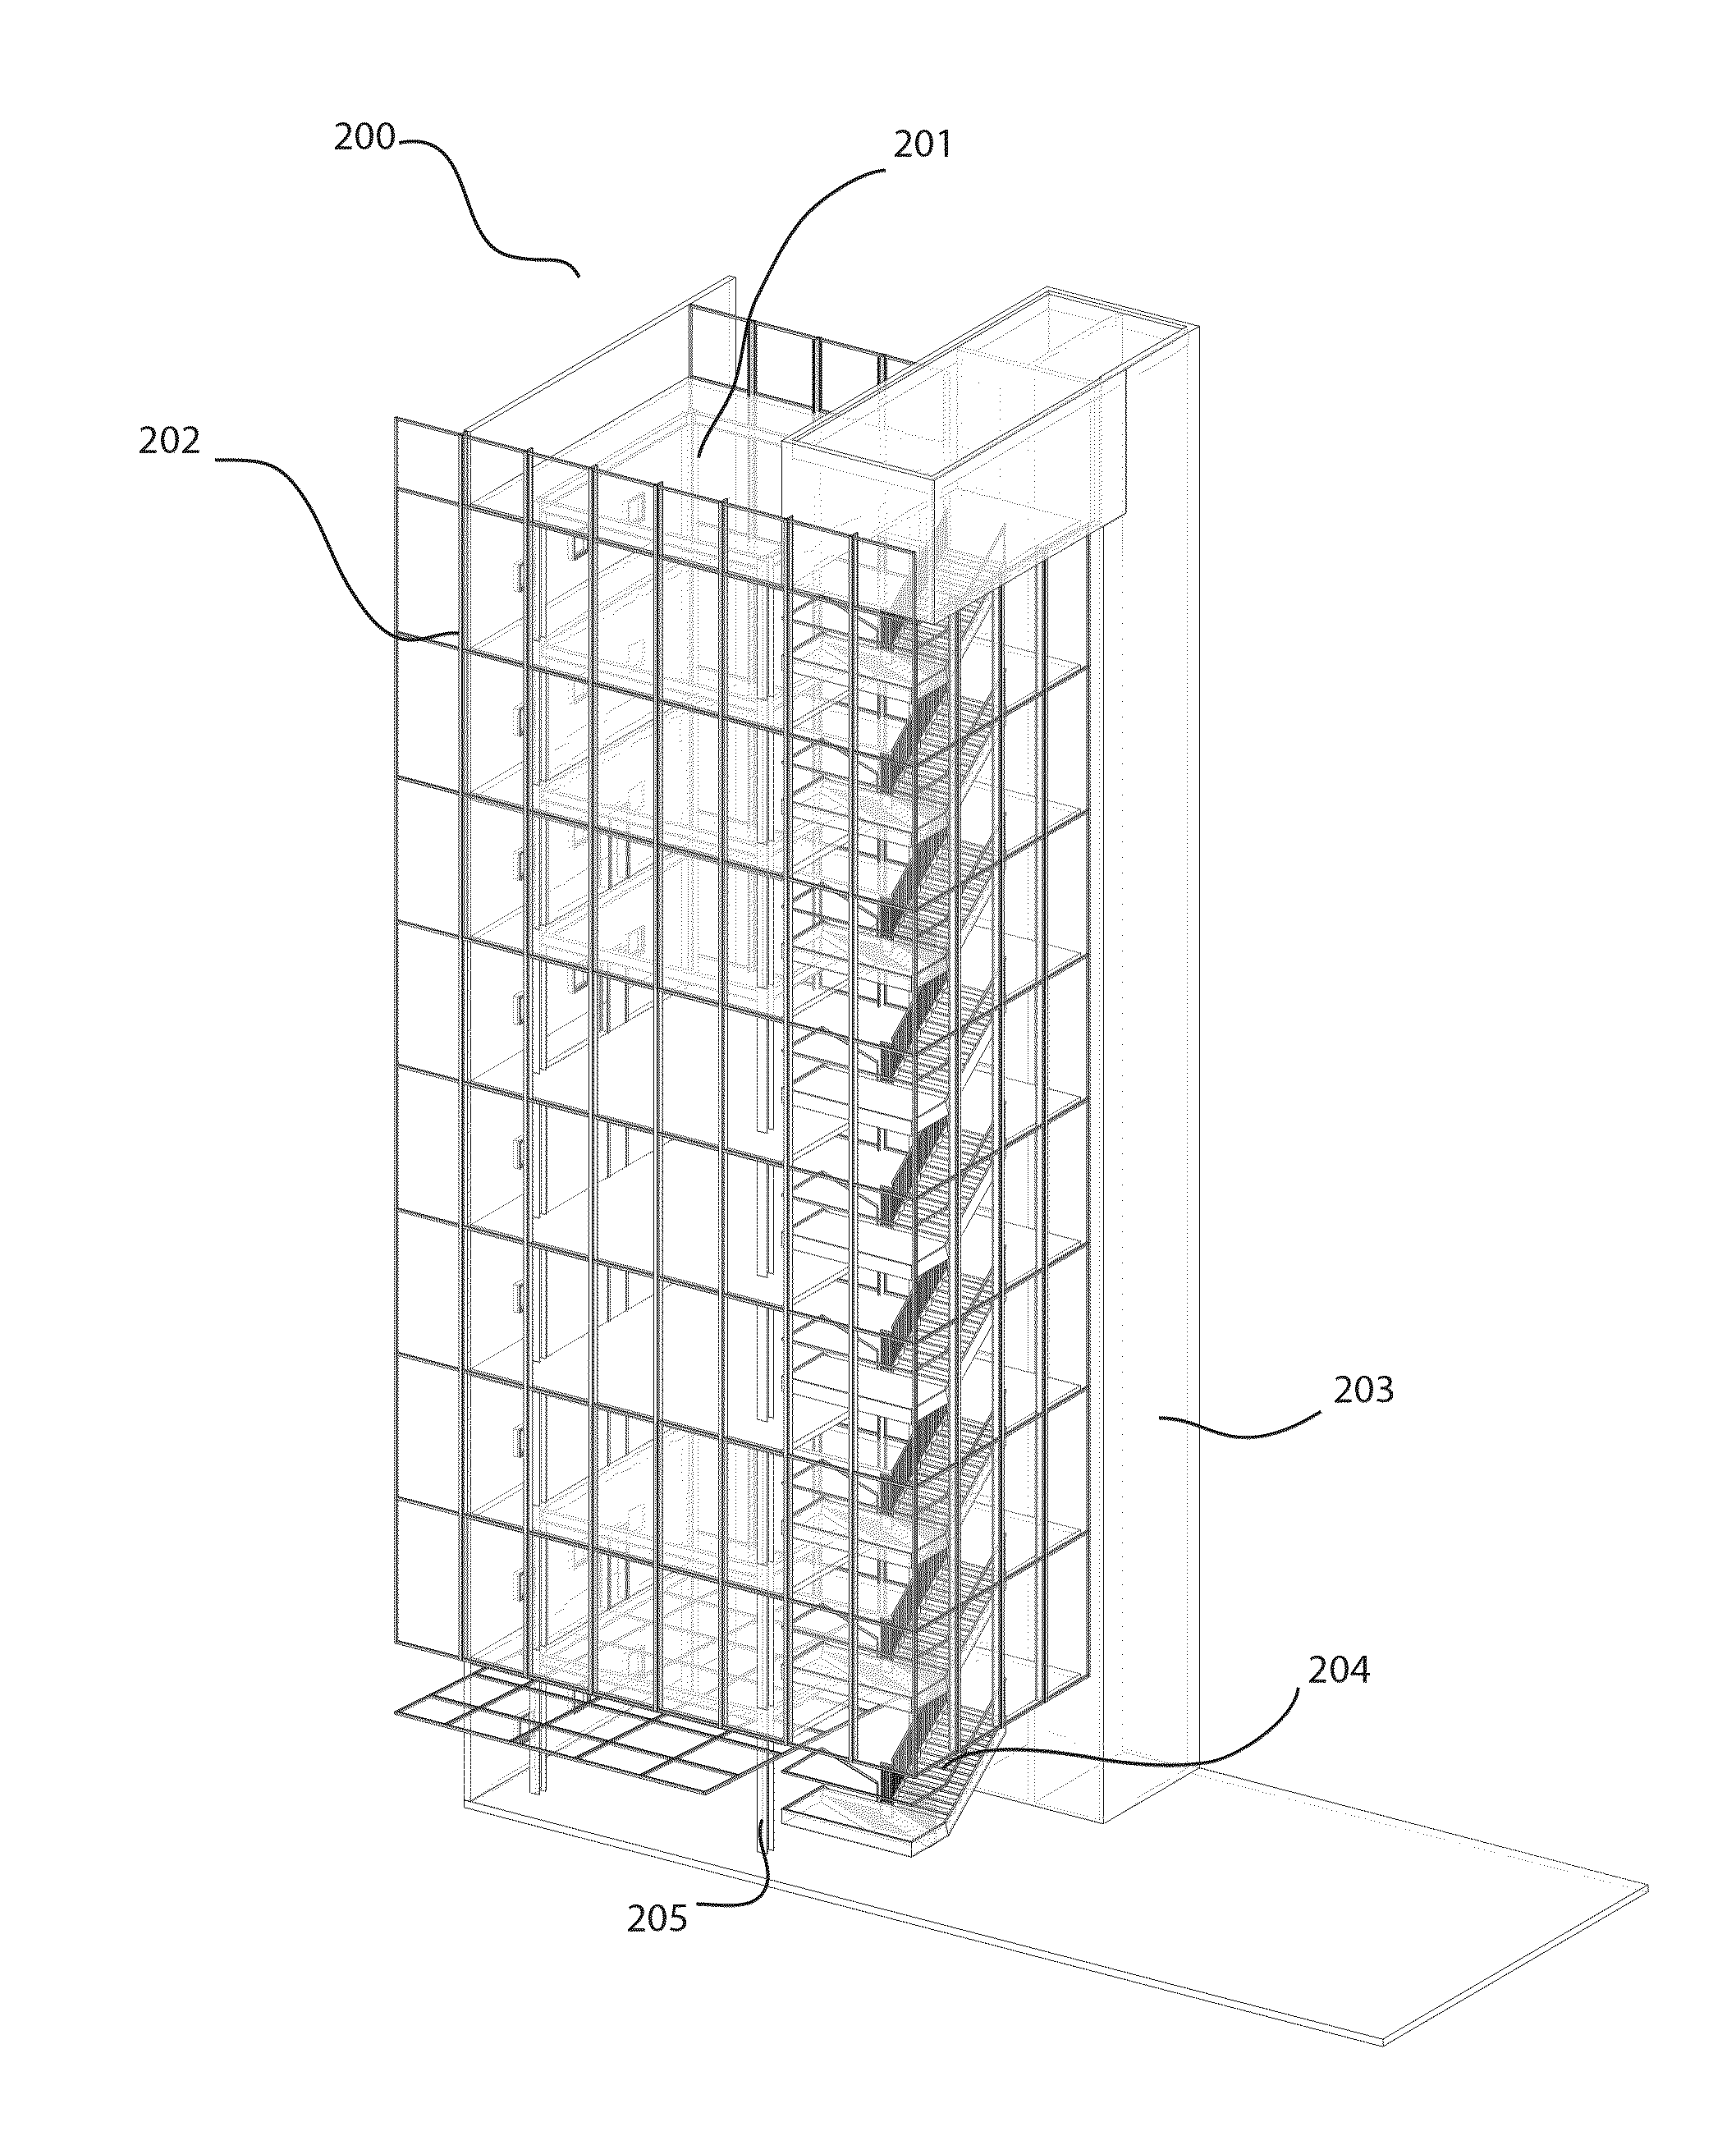 Method for real time estimation of embodied environmental impact in a building design